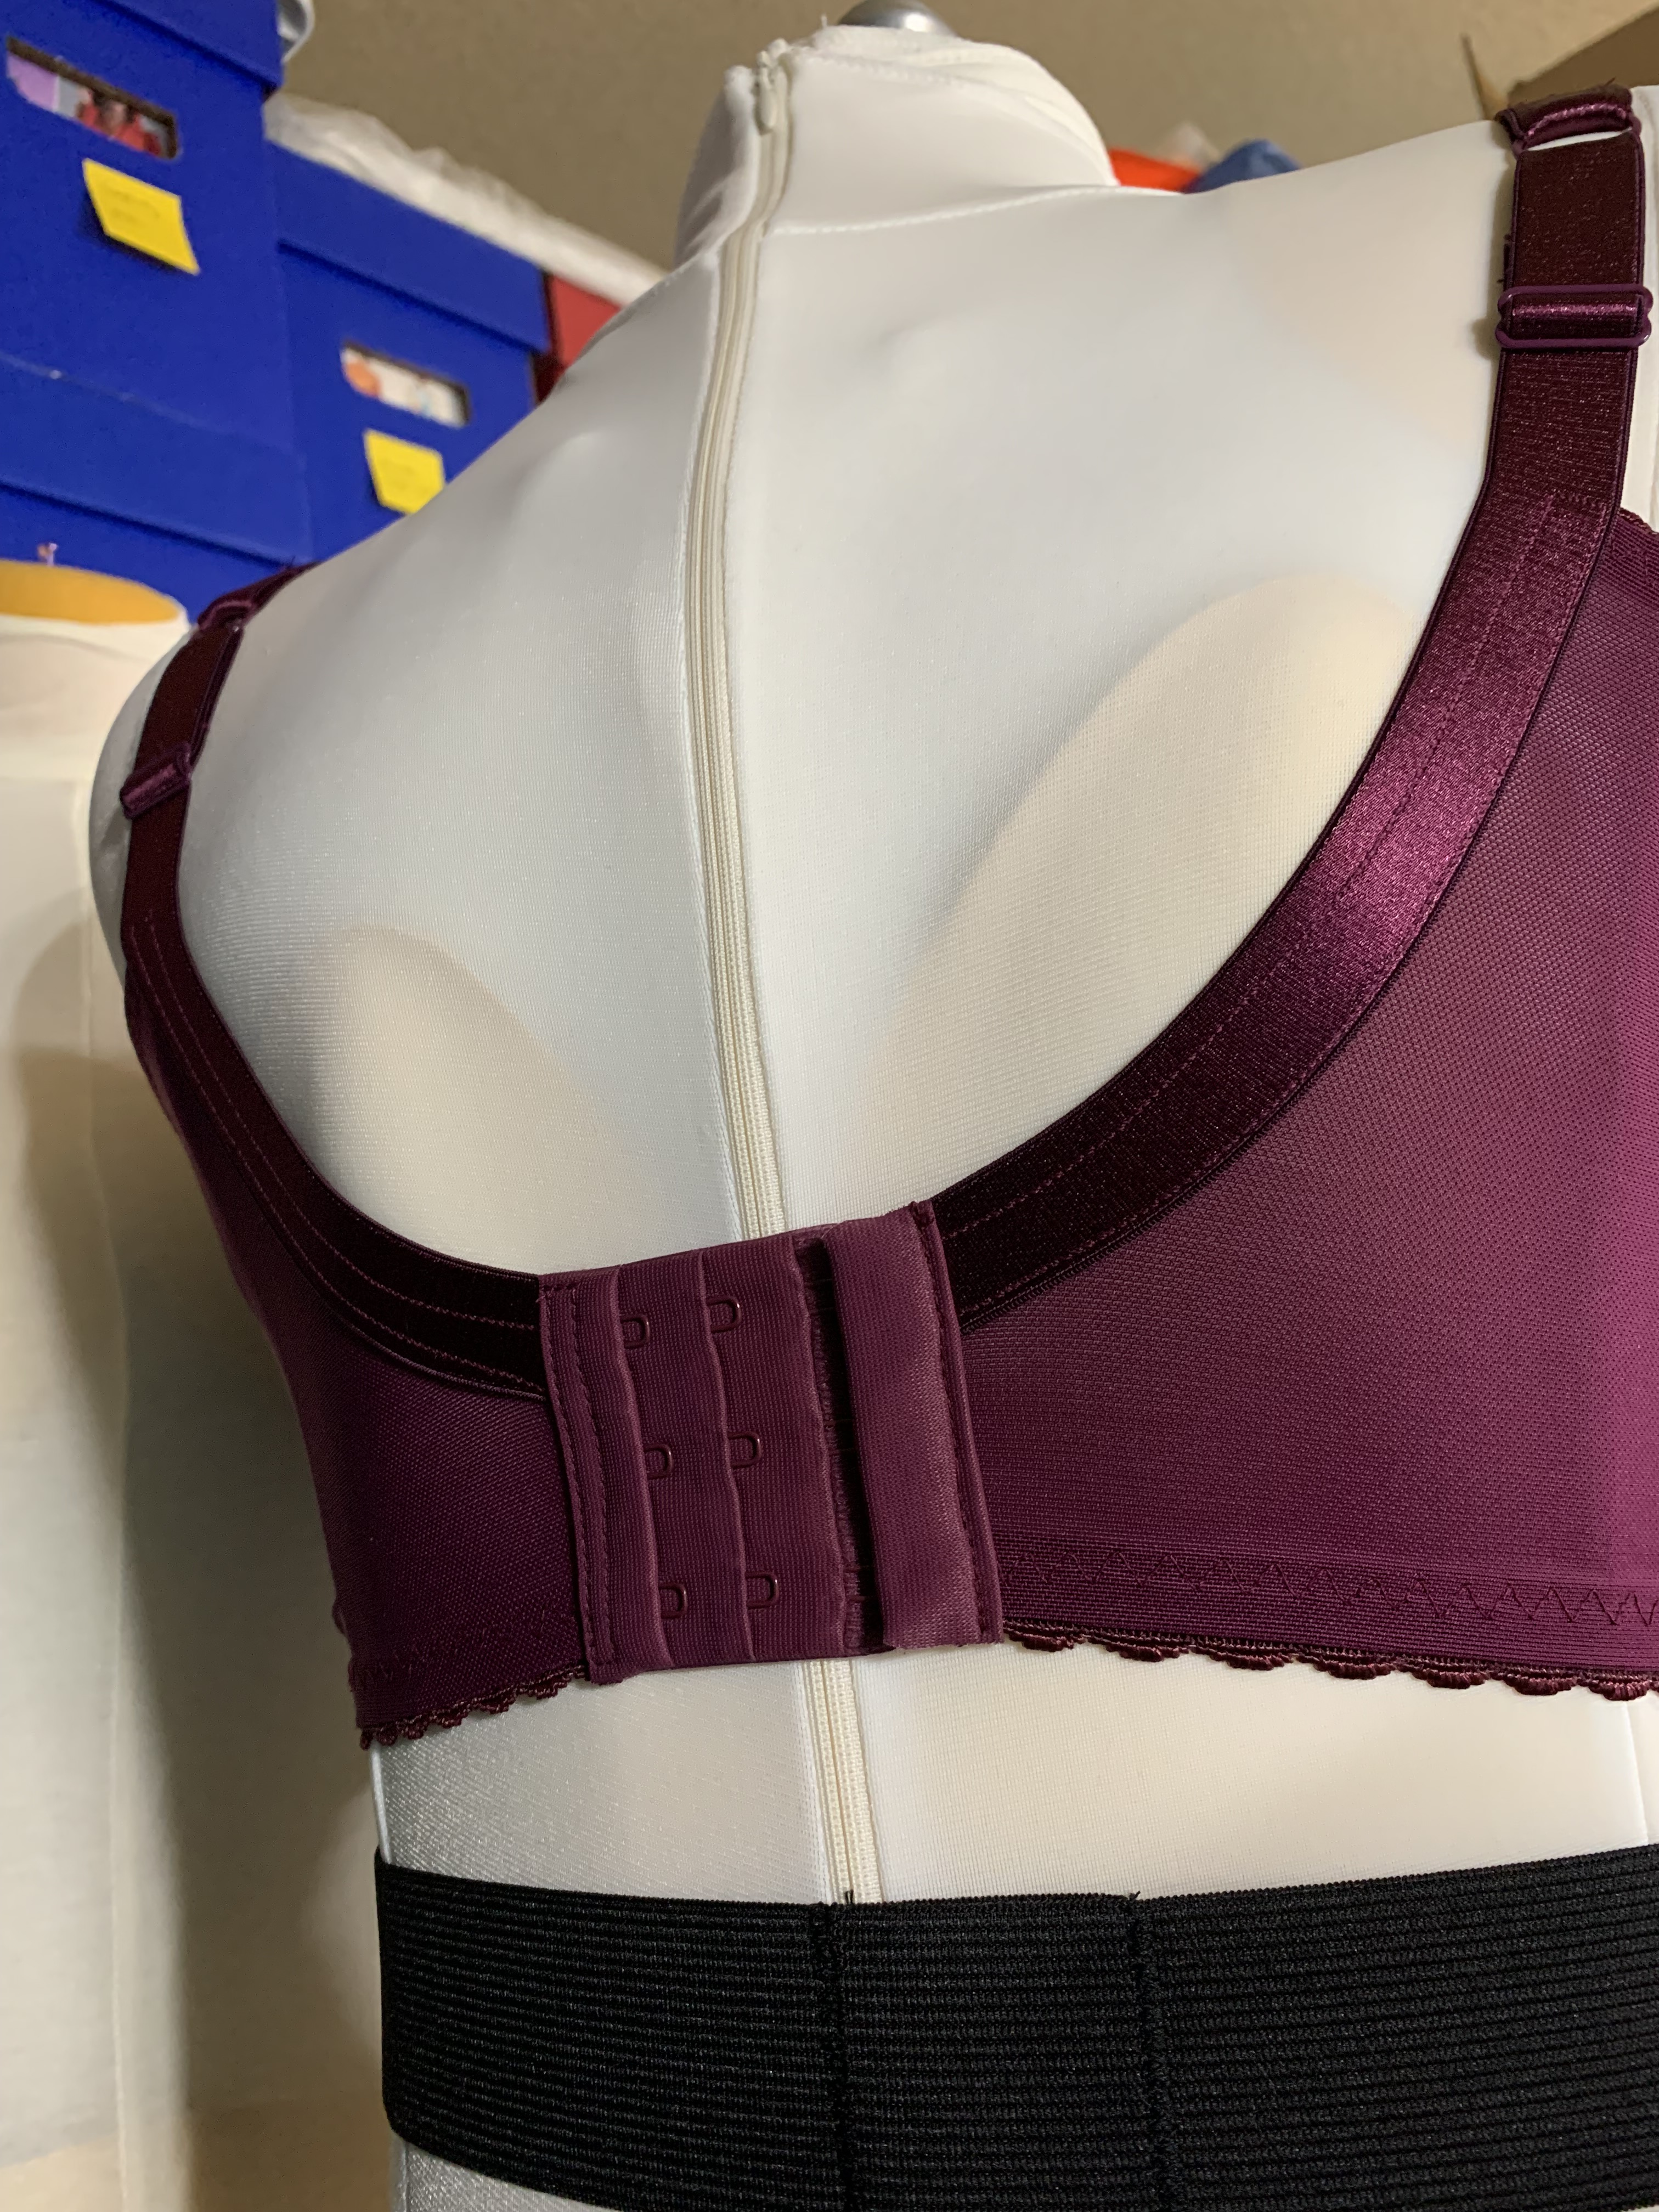 Adventures in Bra Sewing – Part 2: Making a Better Fitting Bra! – Doctor T  Designs